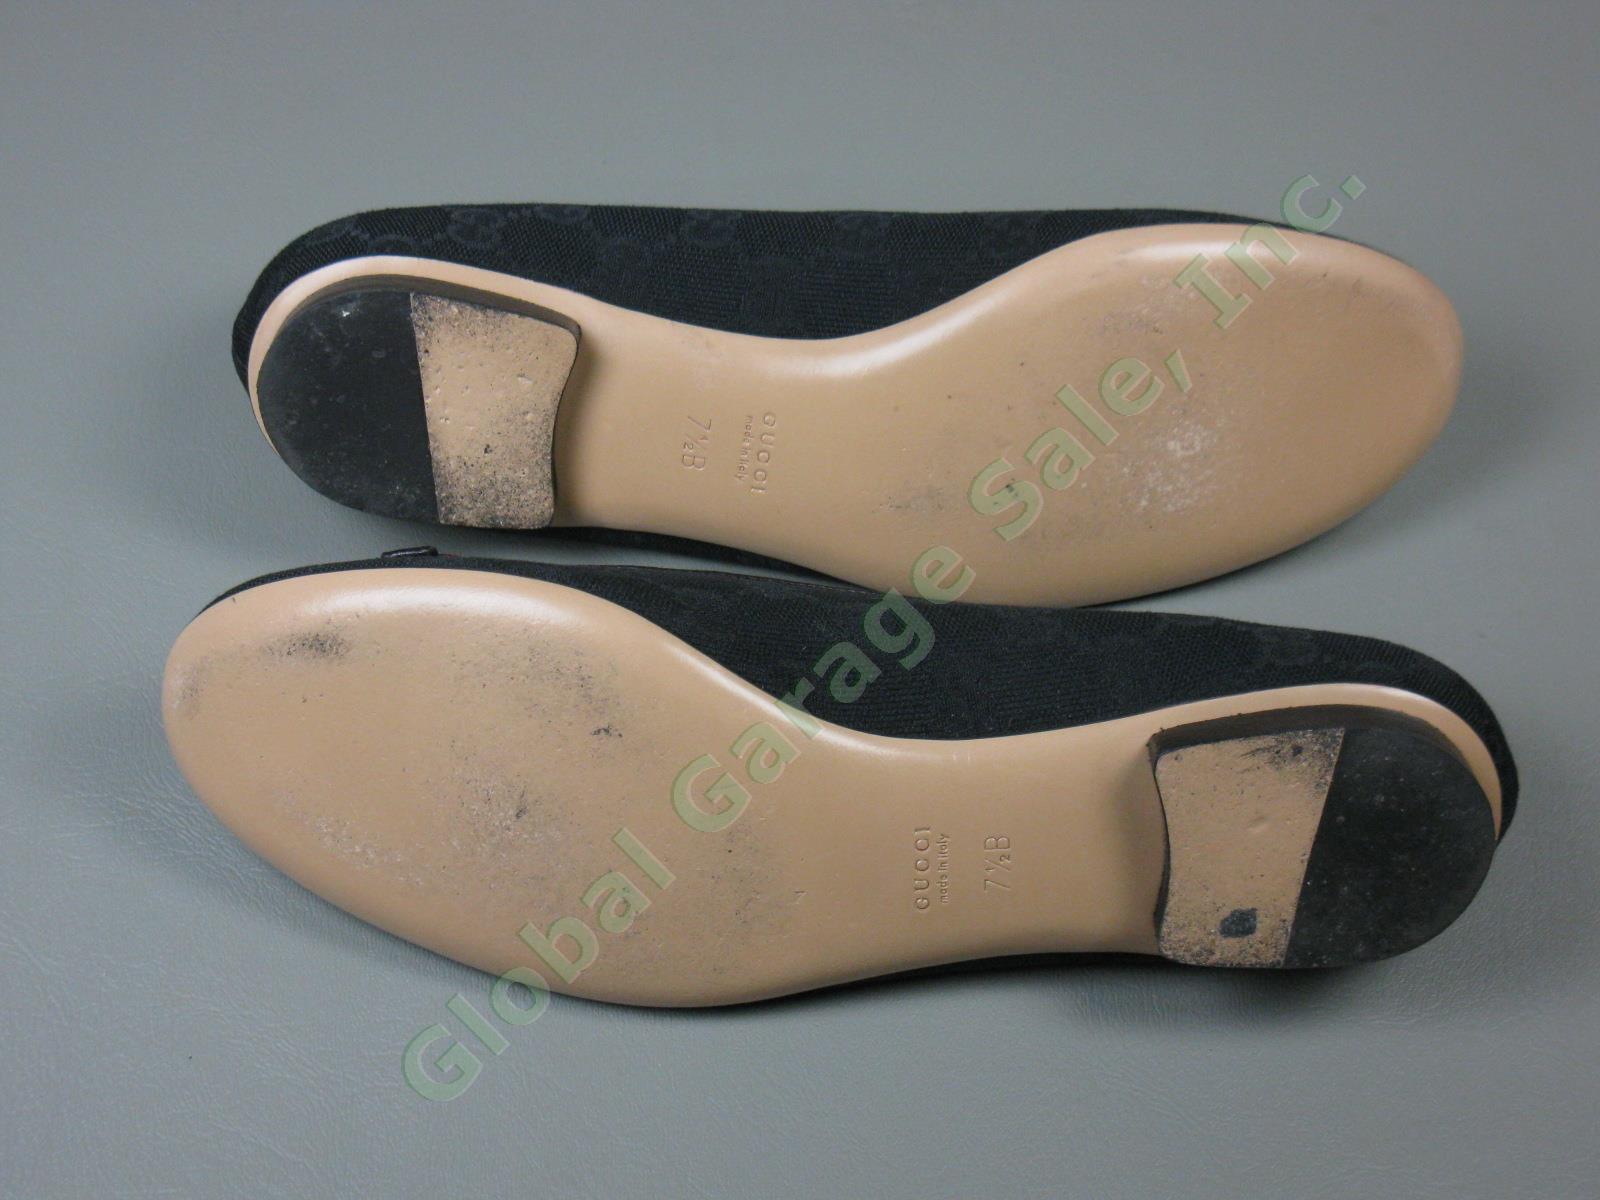 Womens Gucci Moca Tess S Cuoio Flats Size 7.5 Black One Owner With Box 161837 NR 9